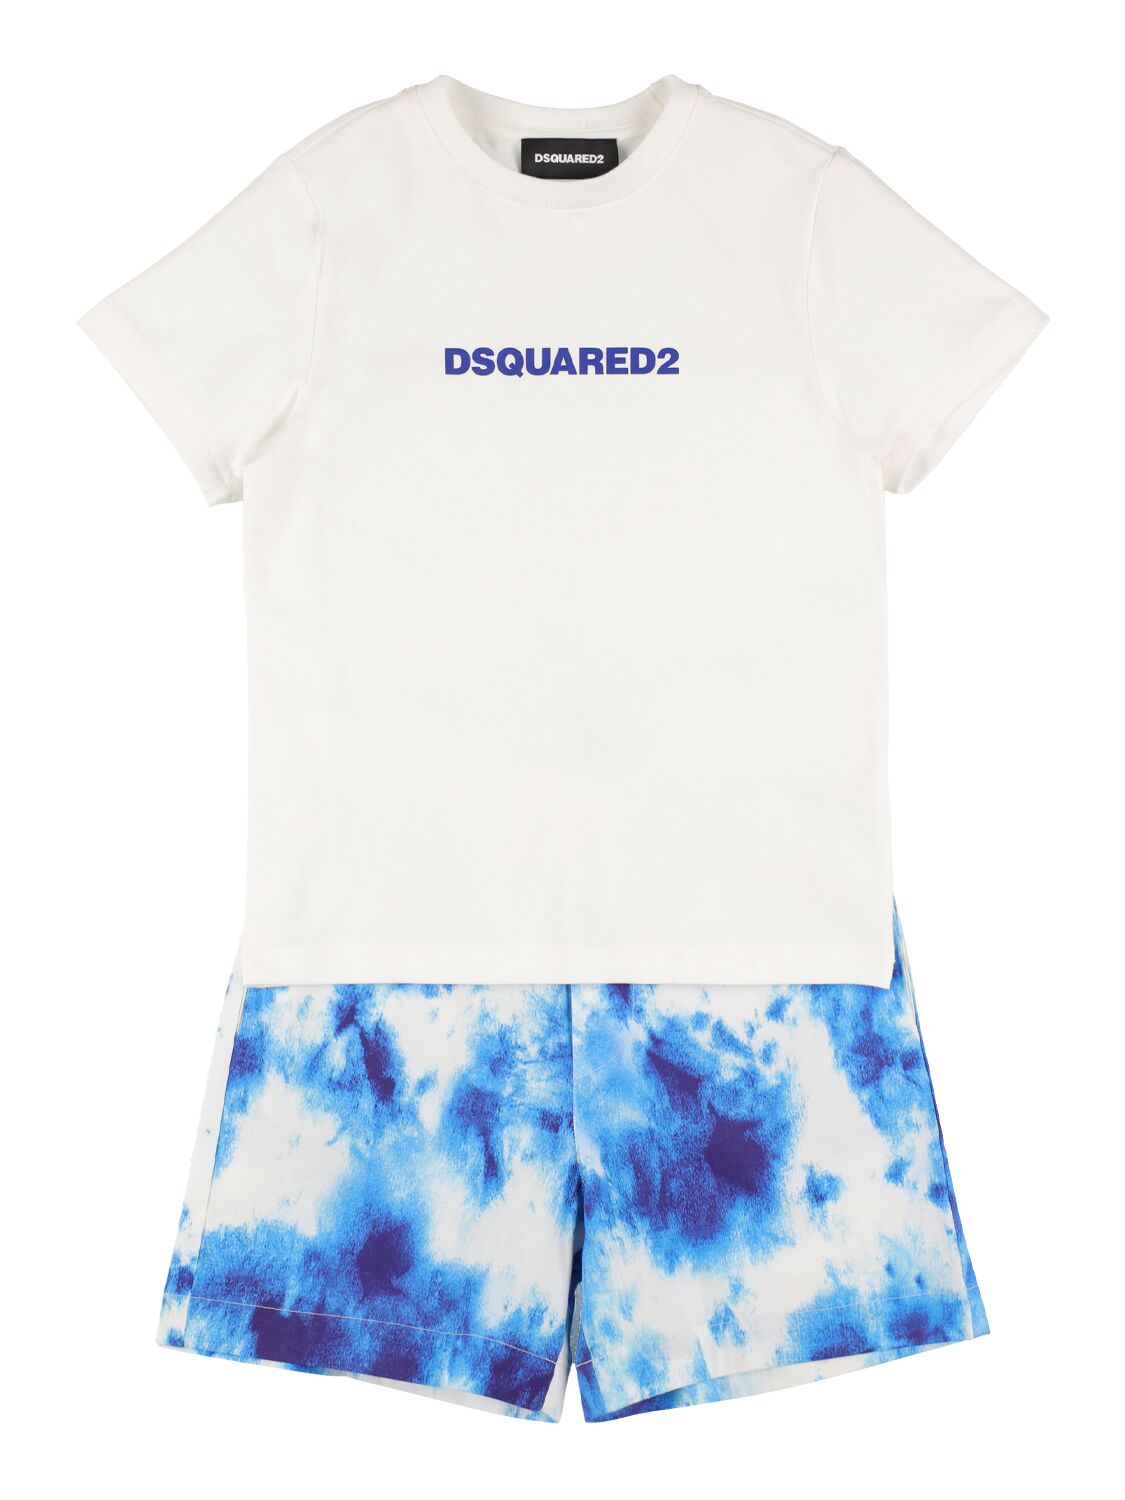 Dsquared2 Kids' Printed Cotton Jersey T-shirt & Shorts In White,blue